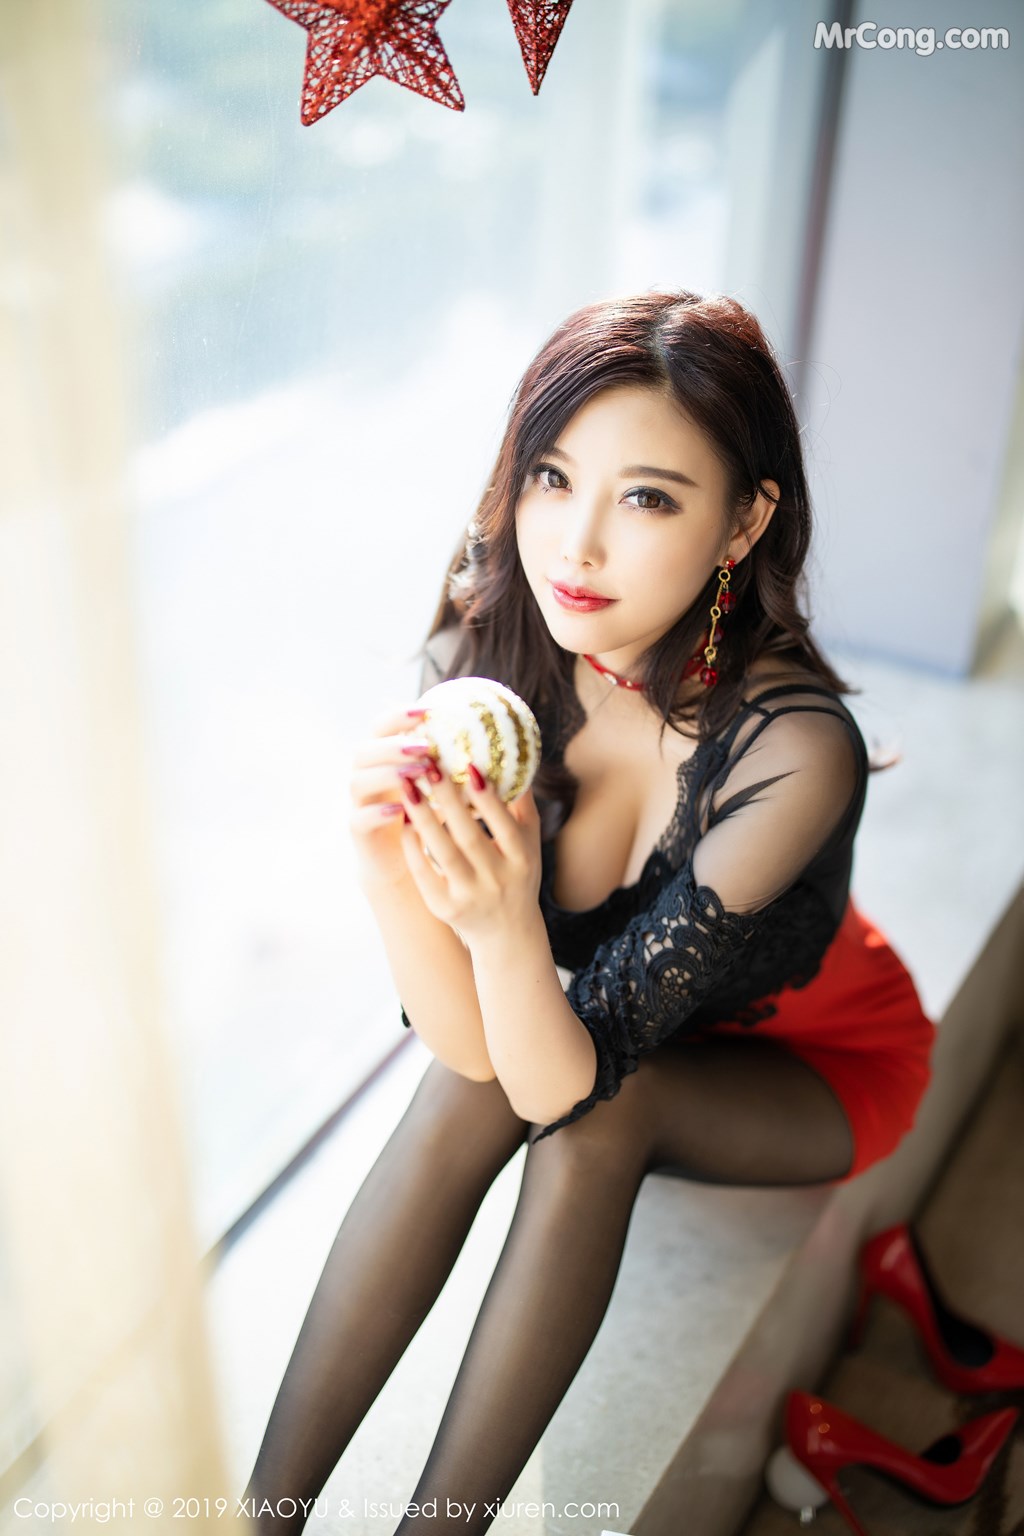 XiaoYu Vol. 225: Yang Chen Chen (杨晨晨 sugar) (104 pictures)